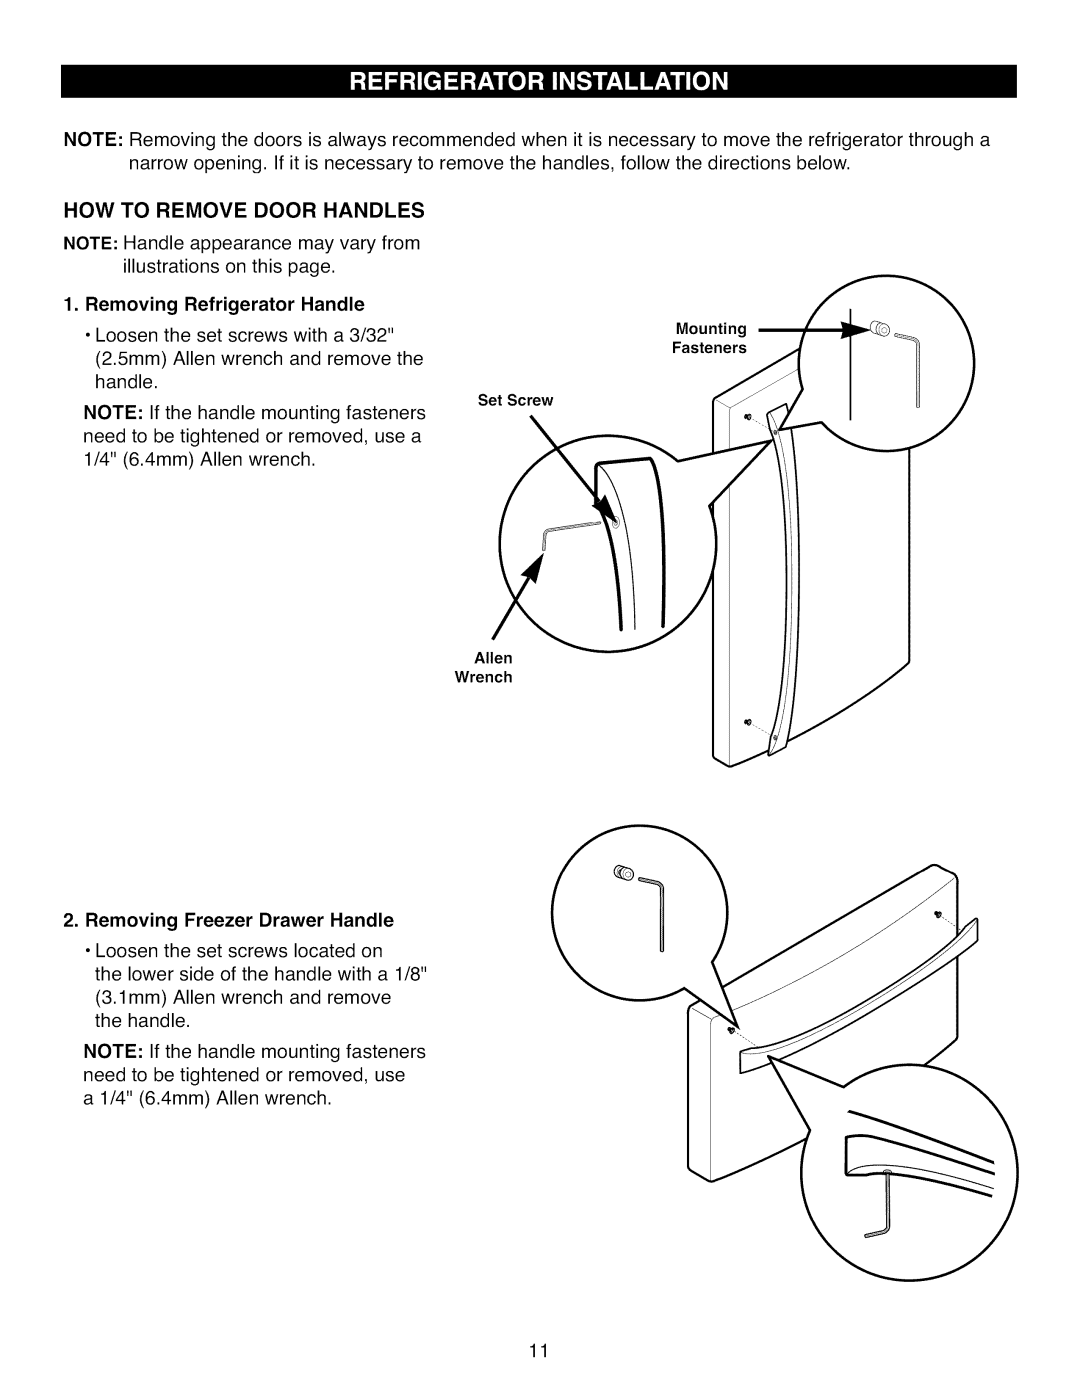 Kenmore 795.7105 manual How To Remove Door Handles, Removing Refrigerator Handle, Removing Freezer Drawer Handle 